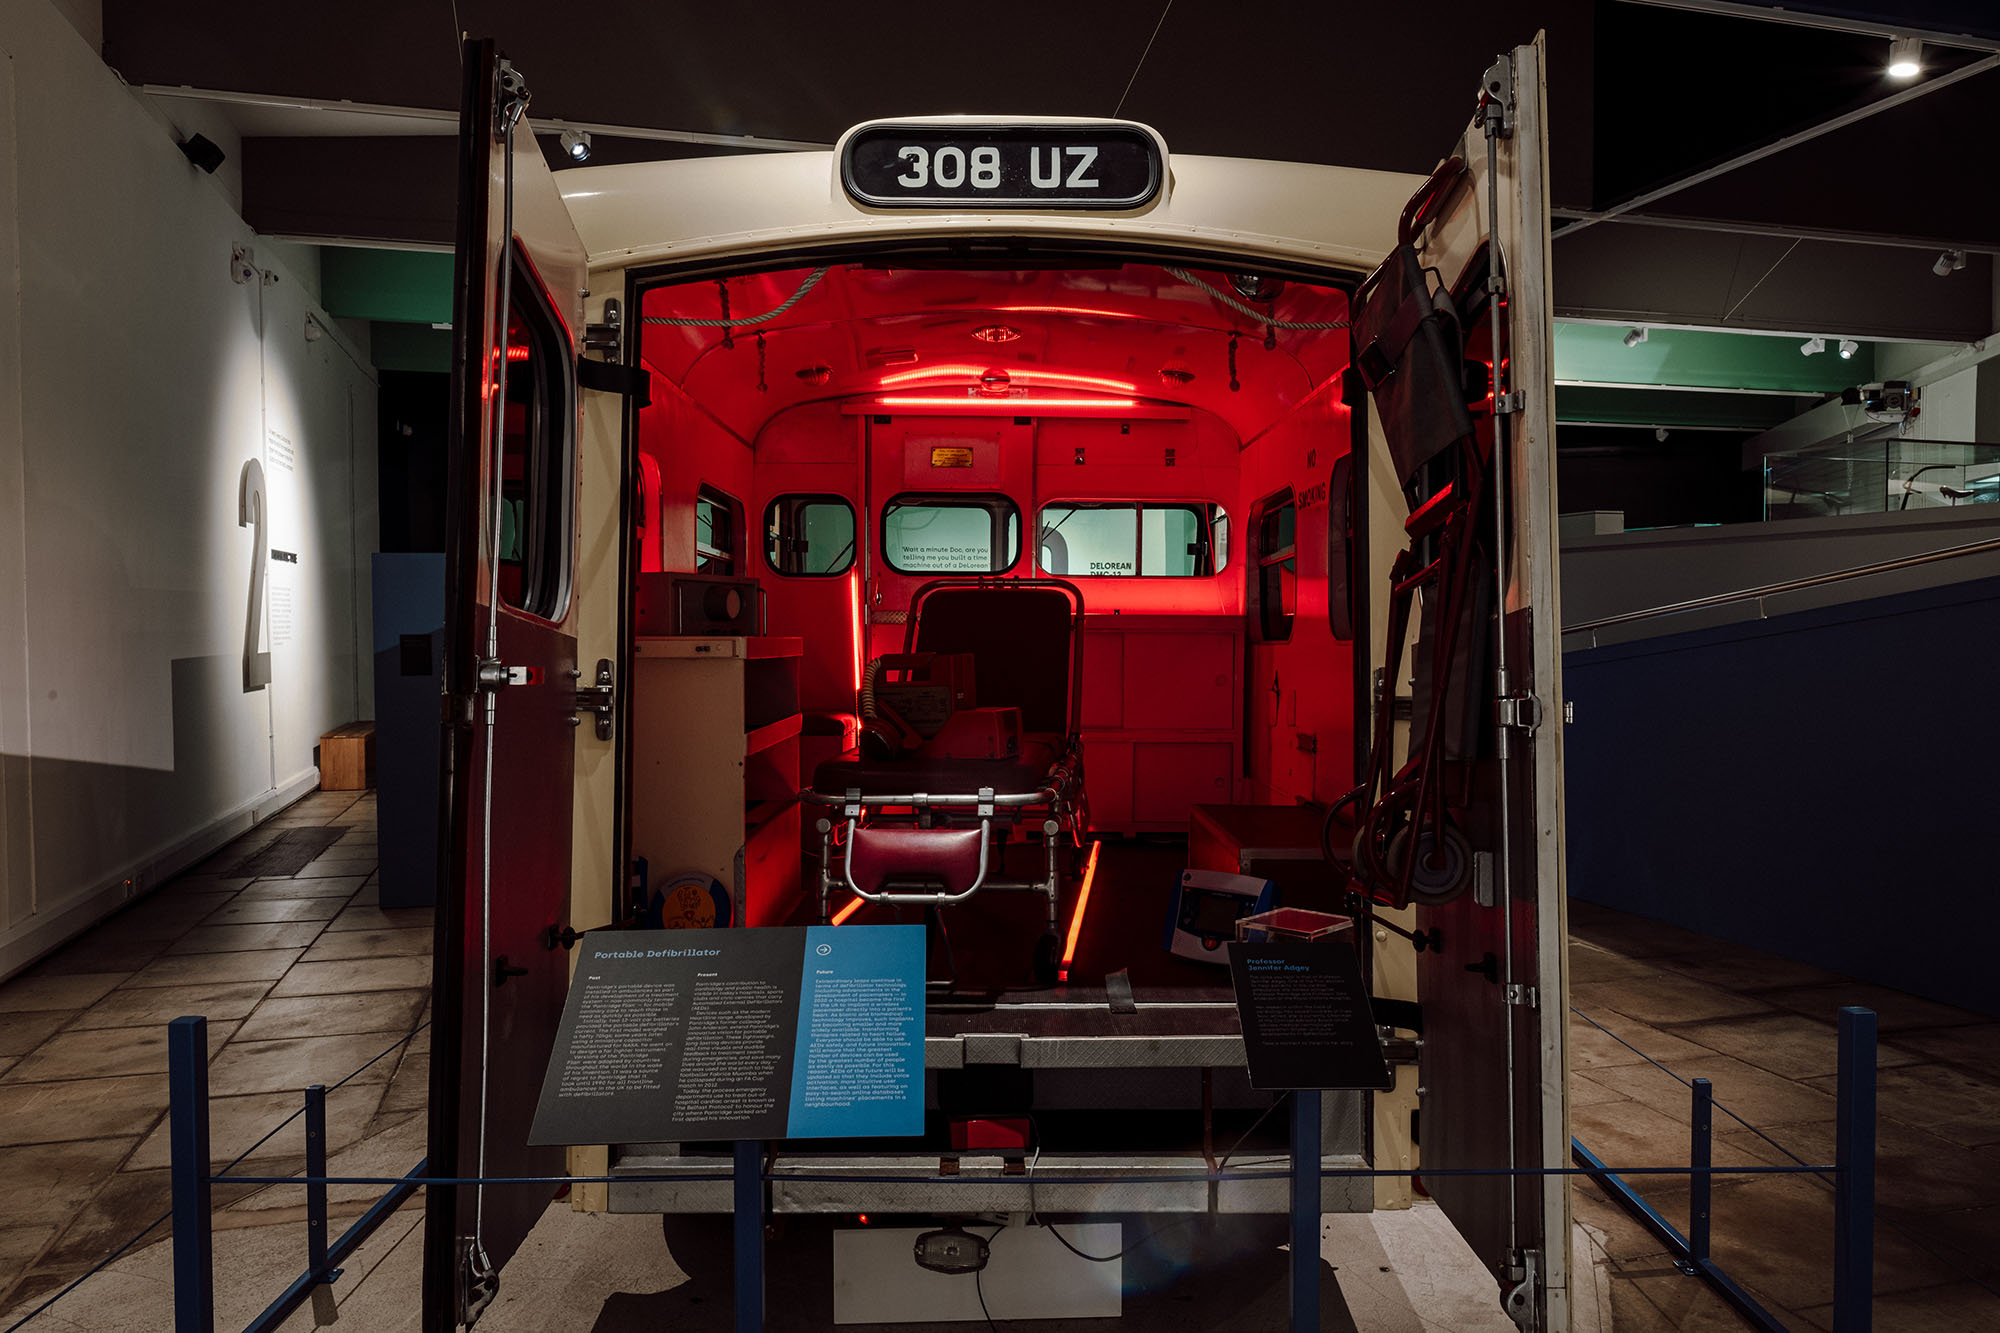 the interior of the ambulance is shown with a graphic panel titled 'Portable Defibrillator' in front.